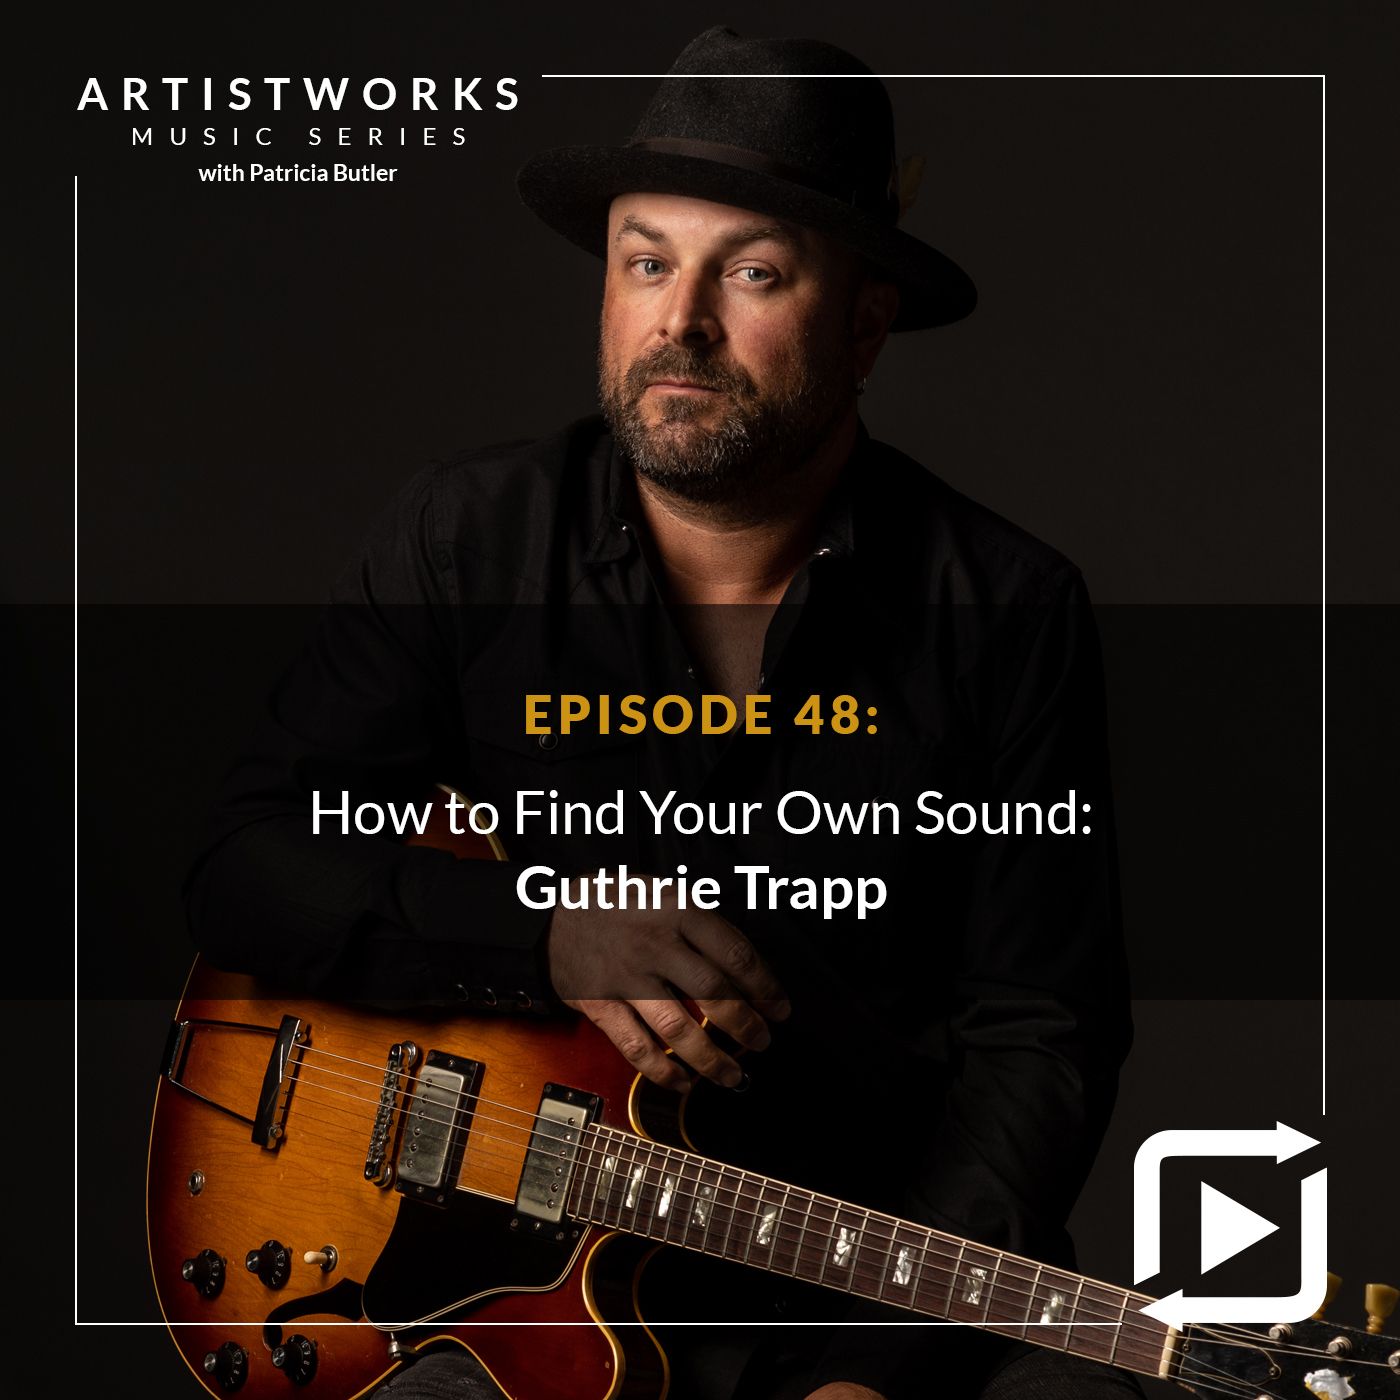 How to Find Your Own Sound: Guthrie Trapp